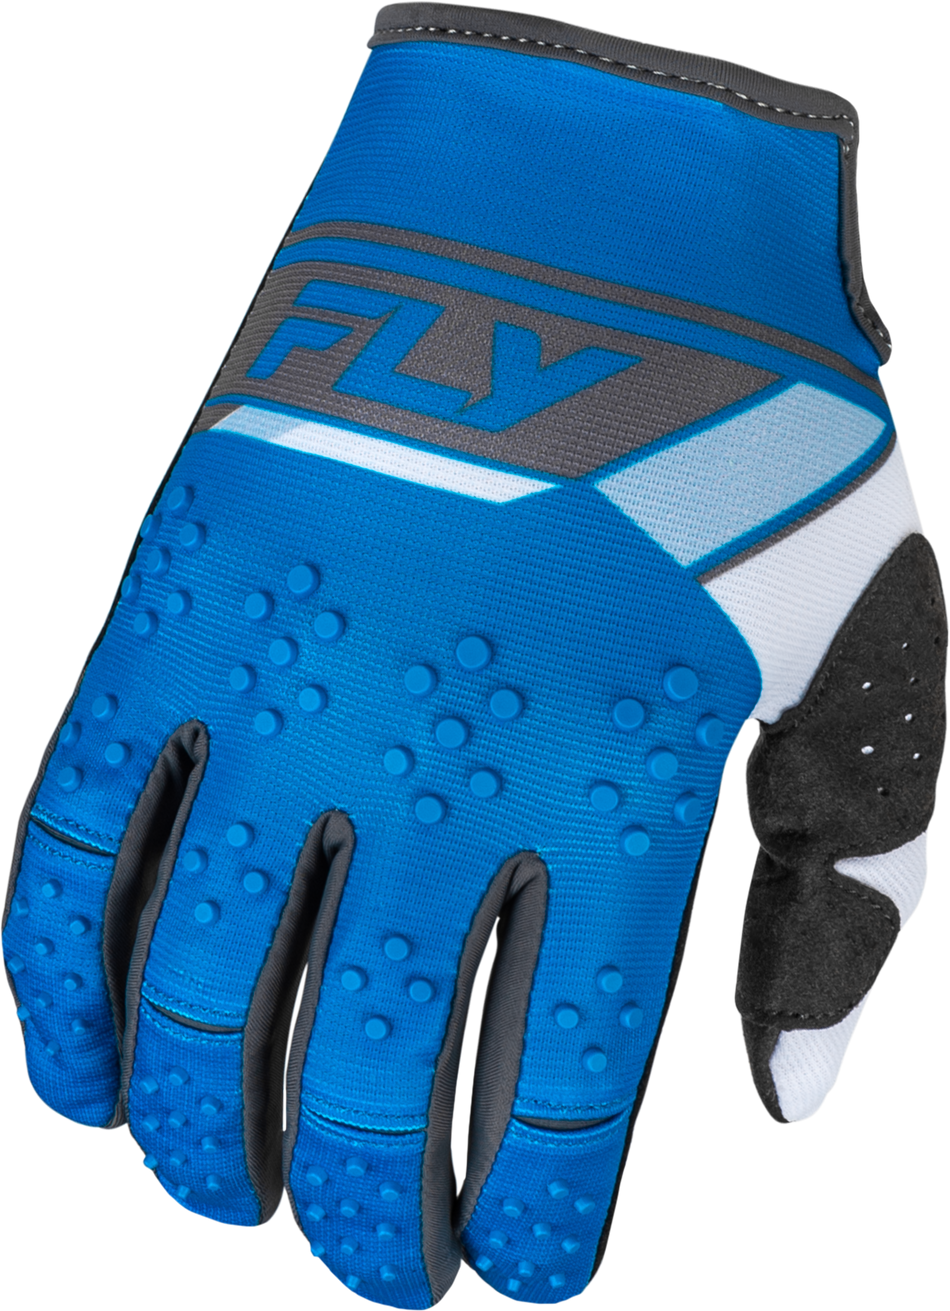 FLY RACING Kinetic Prix Gloves Bright Blue/Charcoal Sm 377-410S